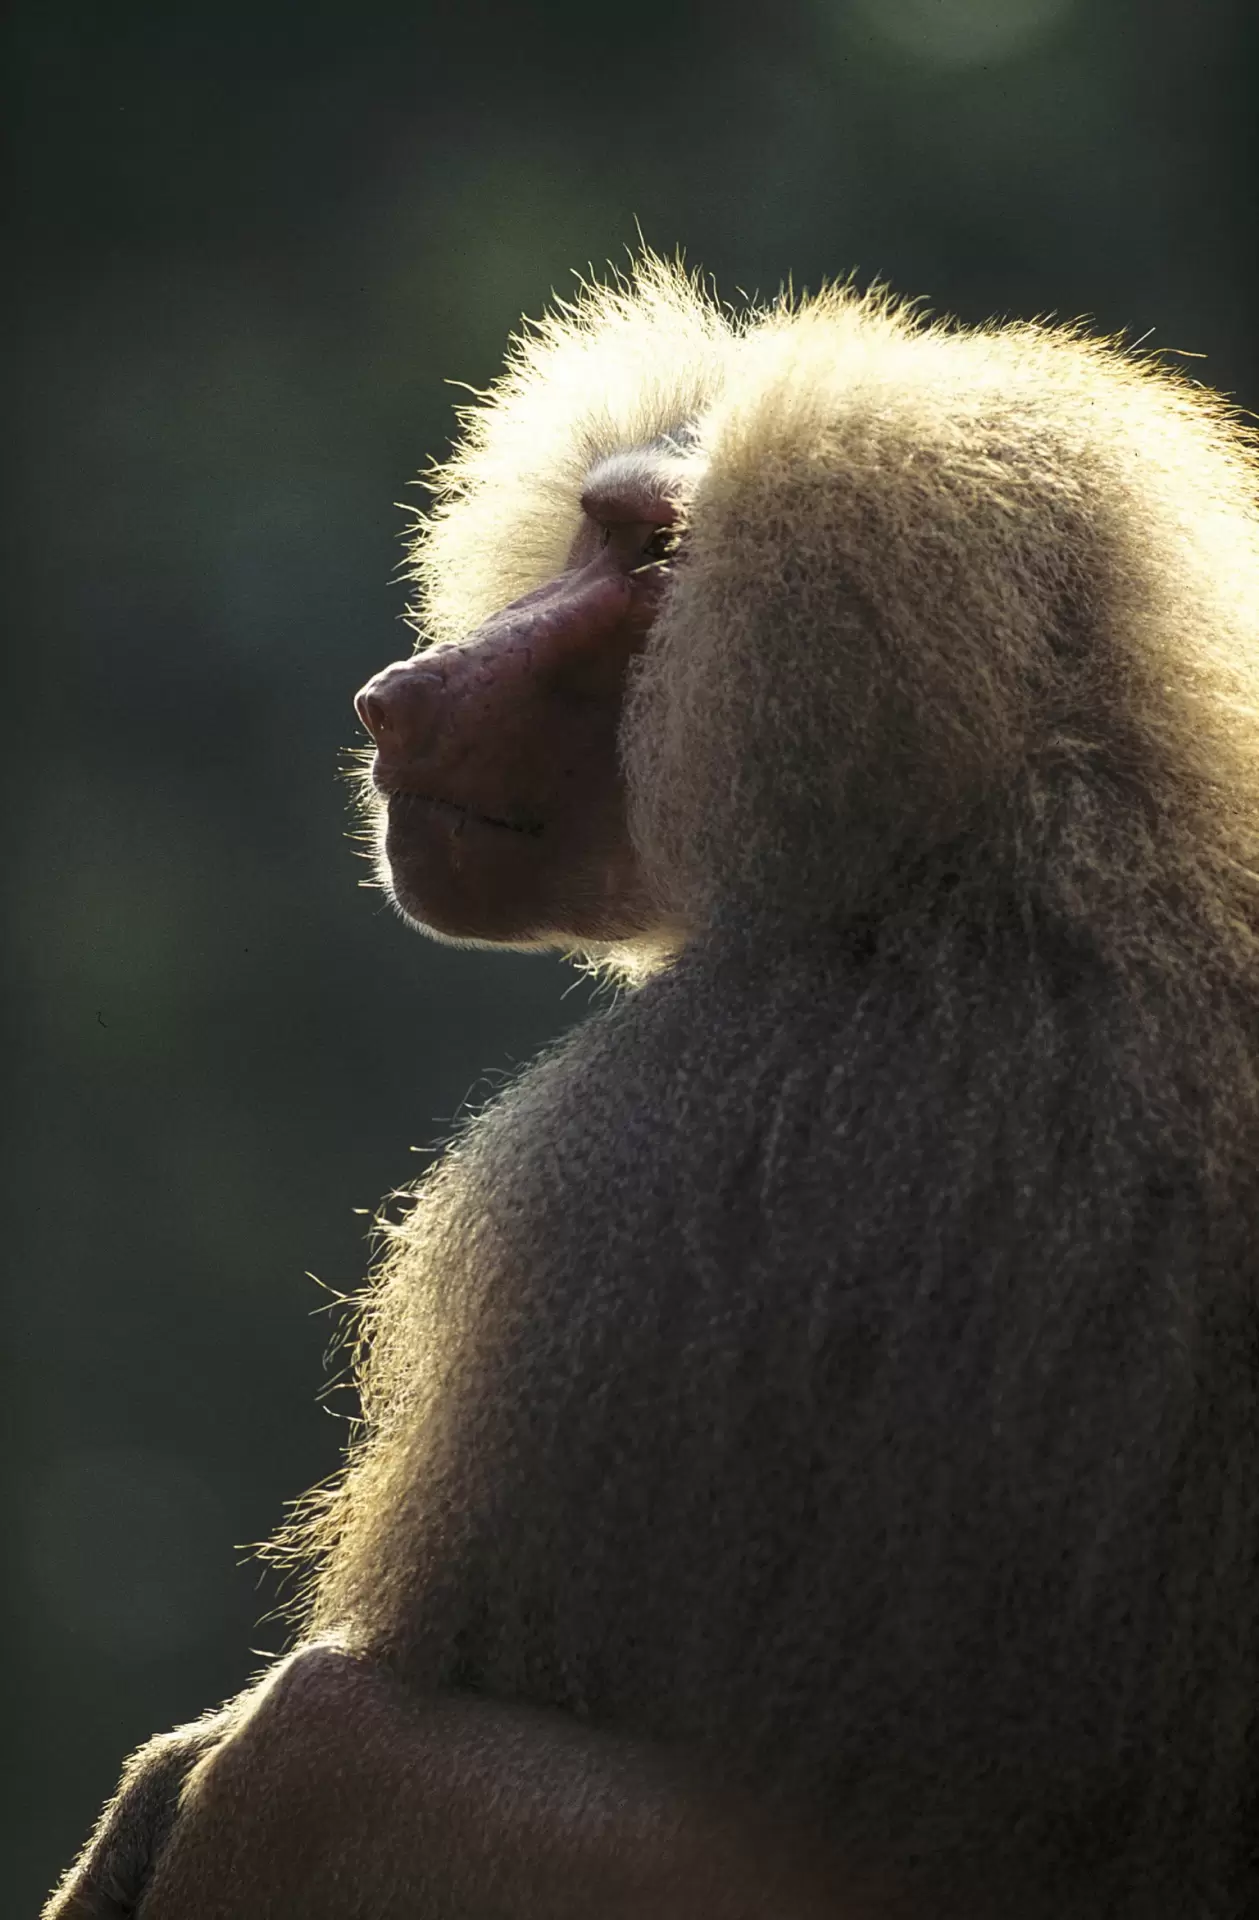 Papio hamadryas papio hamadryas was the only baboon species deified by ancient egyptians credit zooonar gmbh alamy